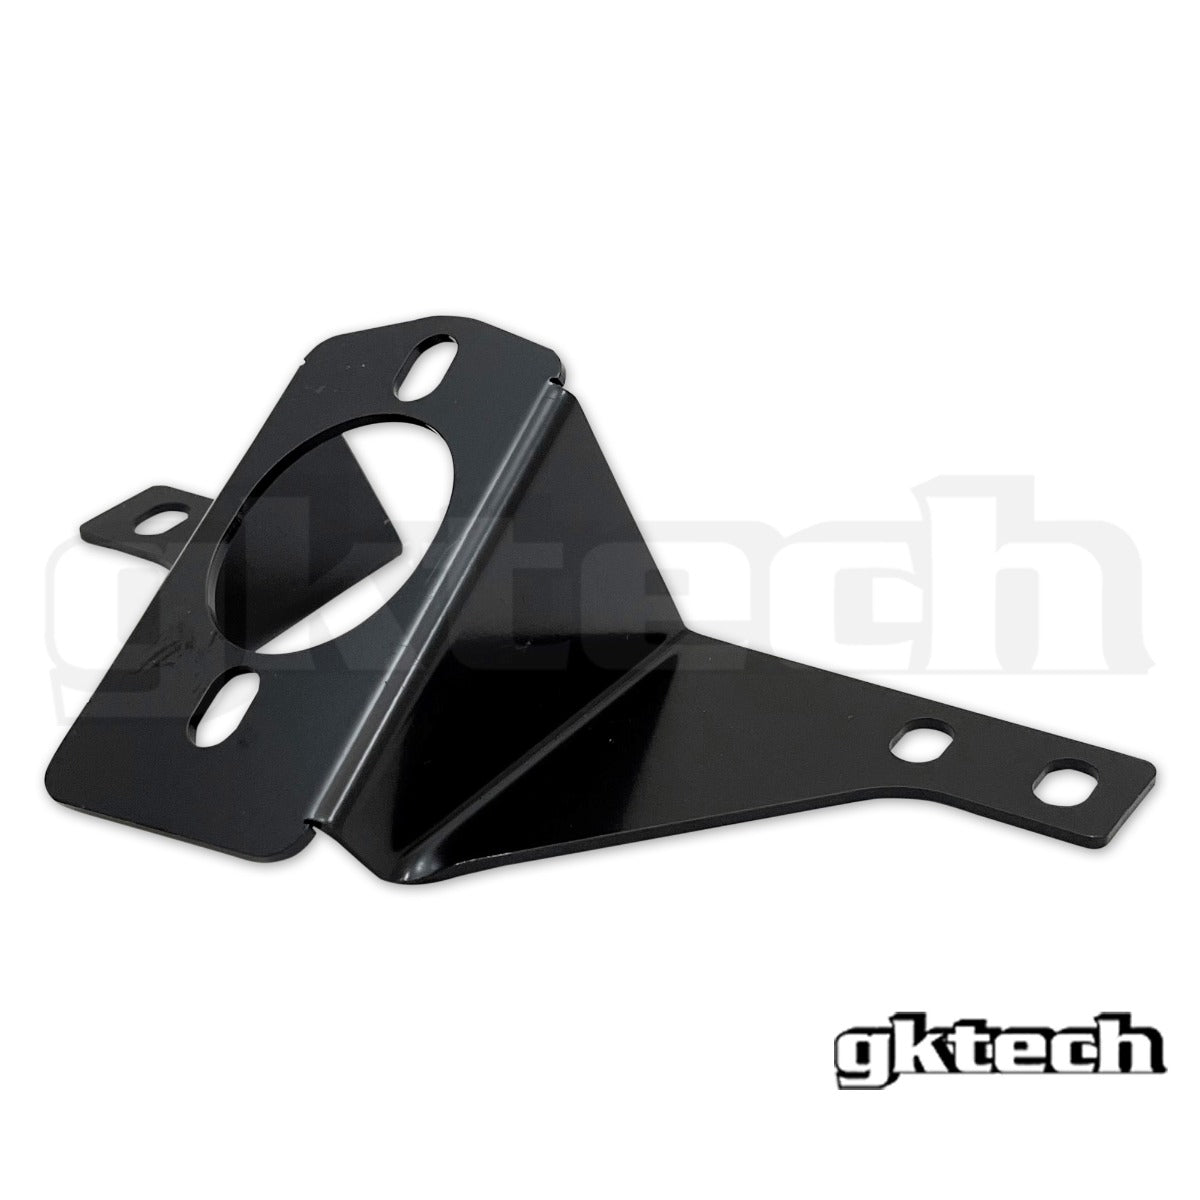 additional support brace to suit 350z hydraulic handbrake assembly